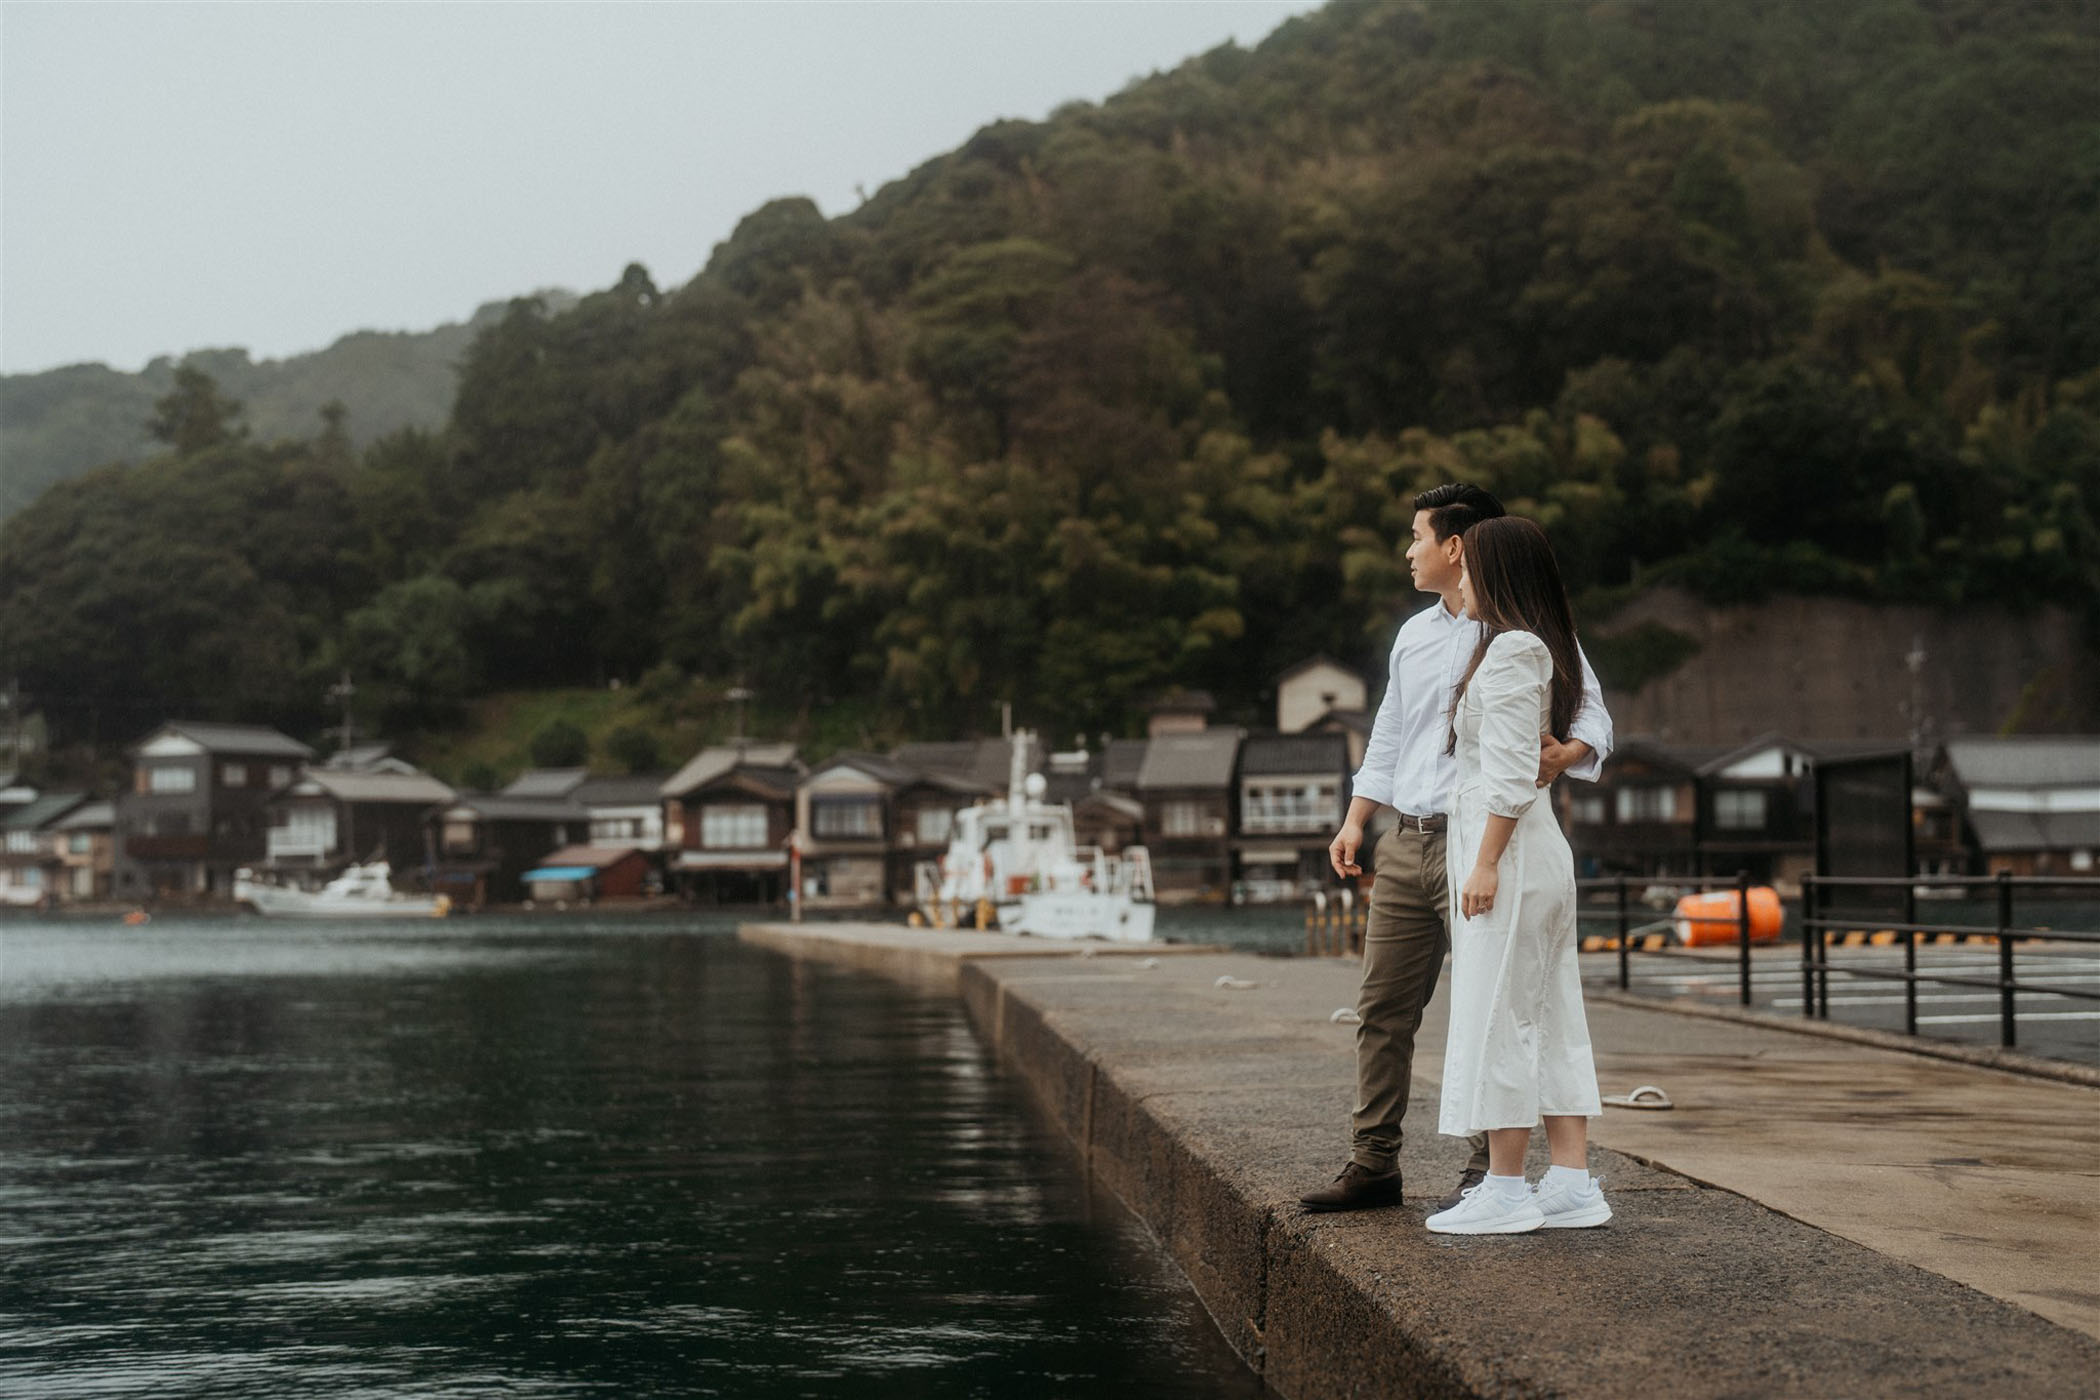 Destination Elopement in Japan with Multiple Outfits